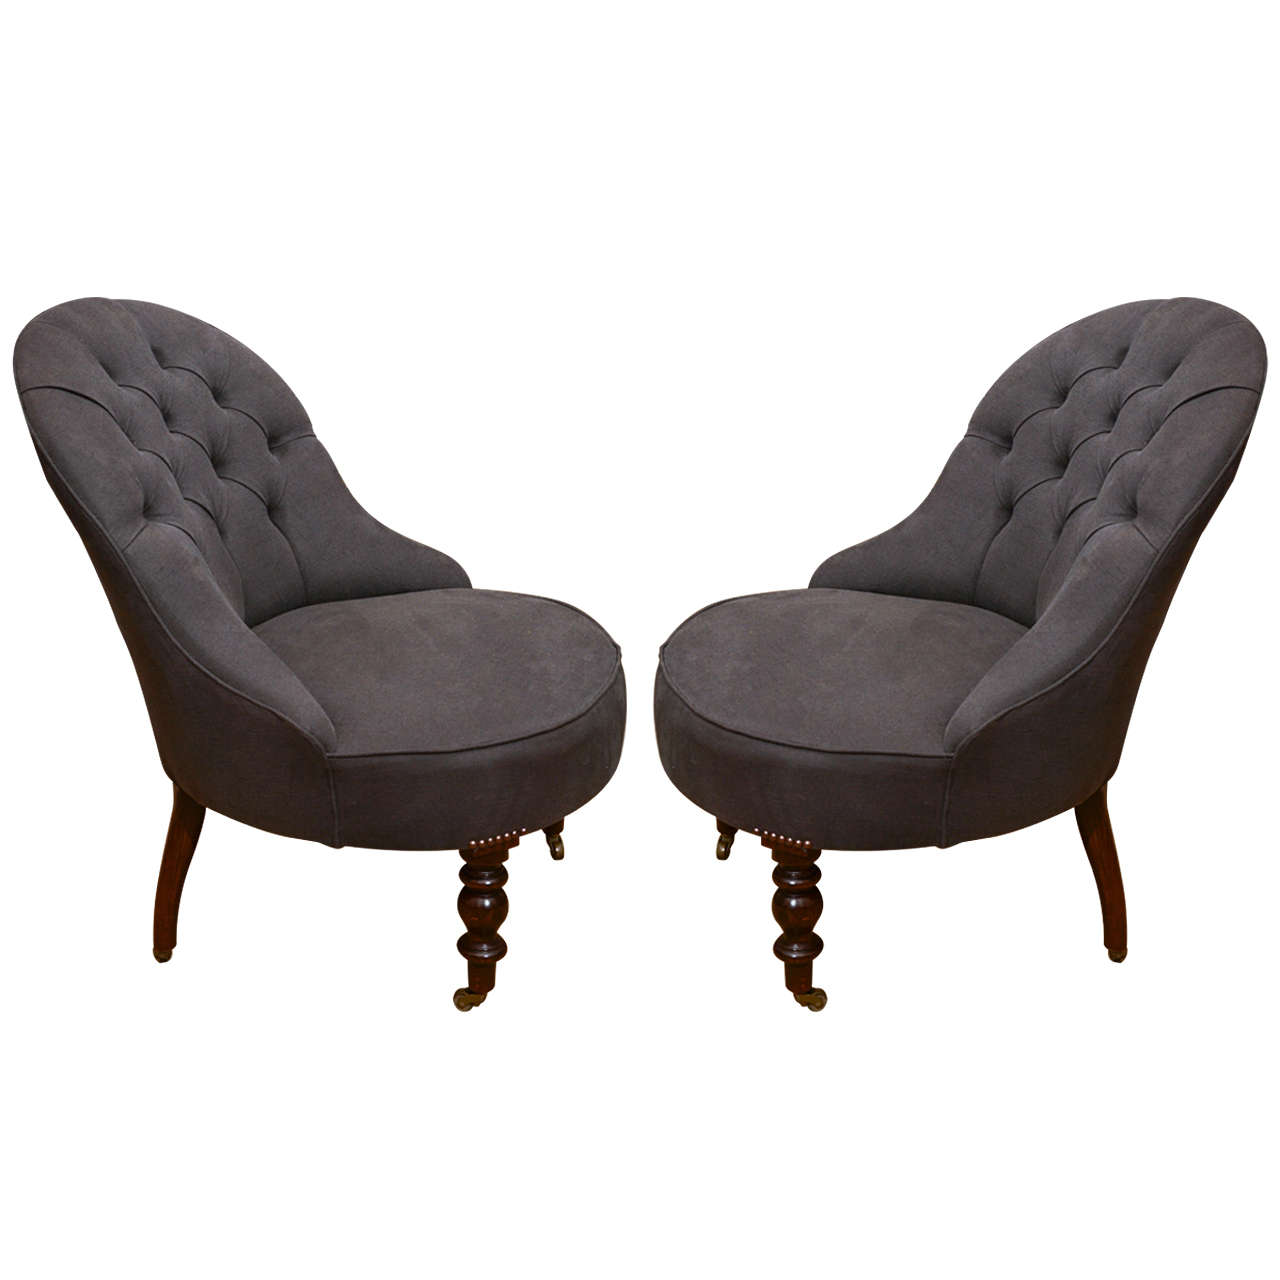 Pair of 19th Century English Tufted Back Upholstered Chairs